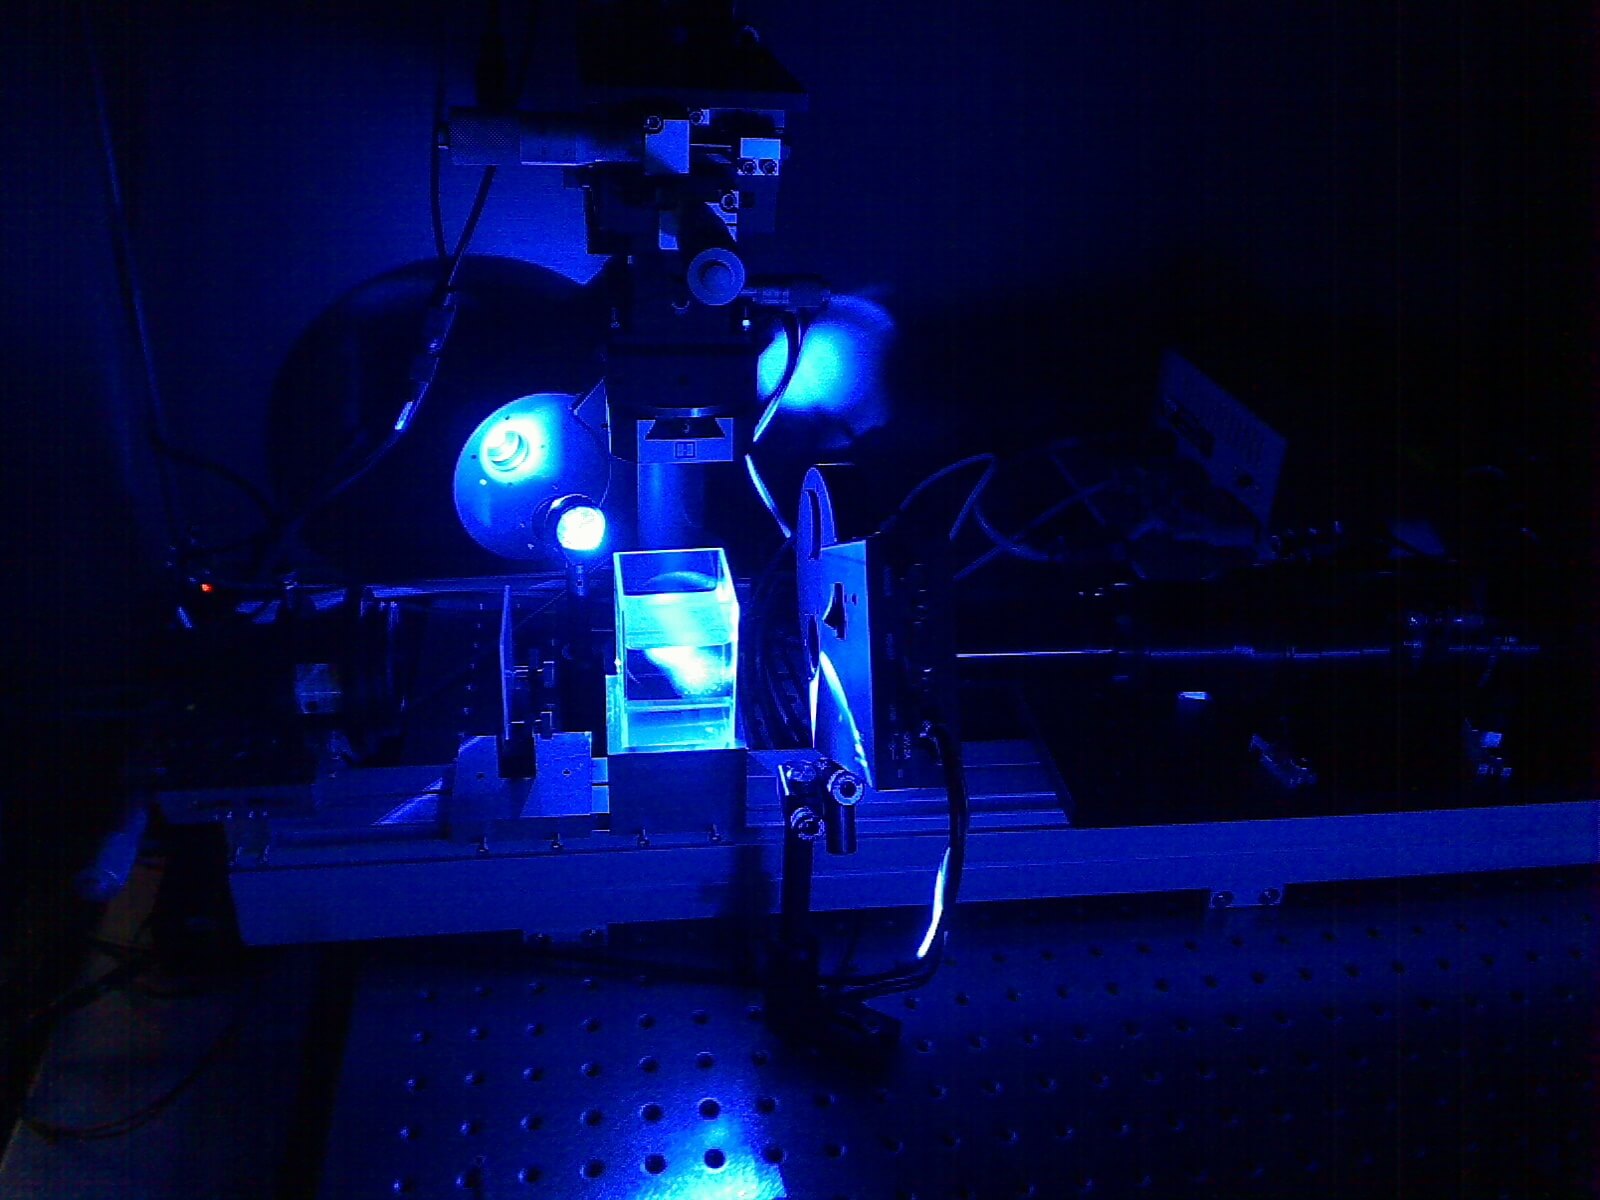 Optical_projection_Tomography_Instrument